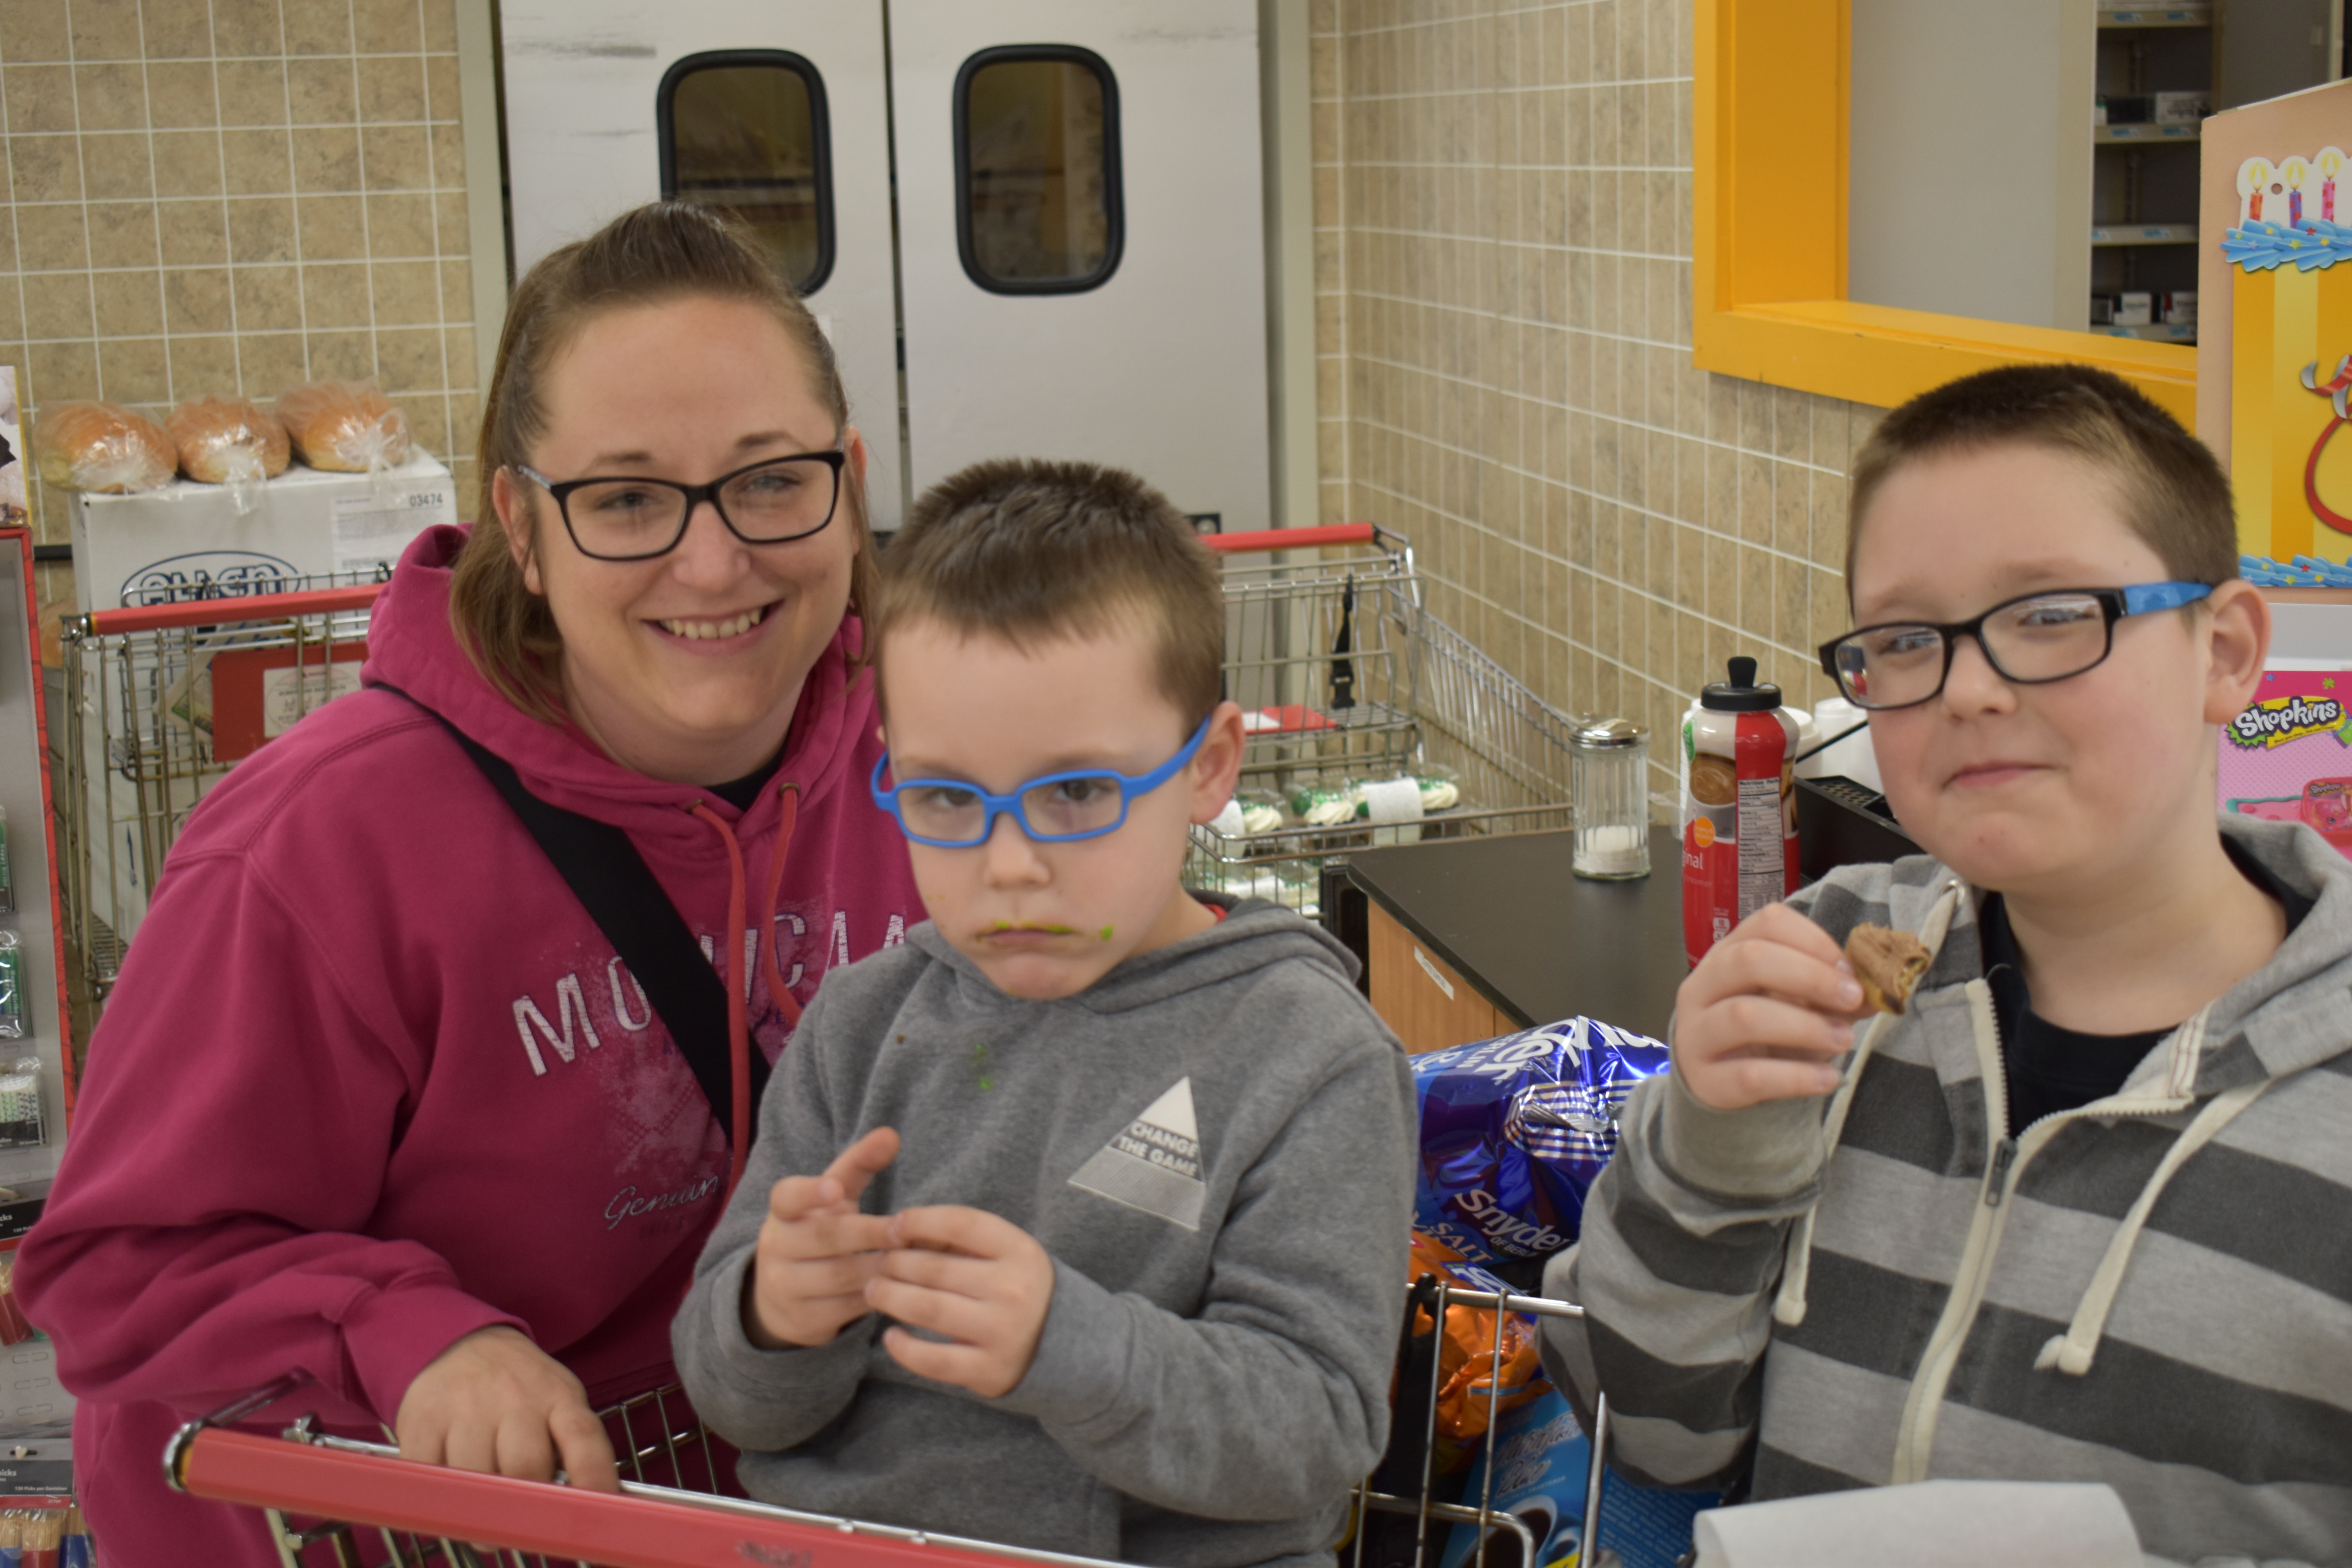 Carli Brant and her sons, Owen, center, and Carter, who are enjoying cookies at Sparkle Market, Brookfield.